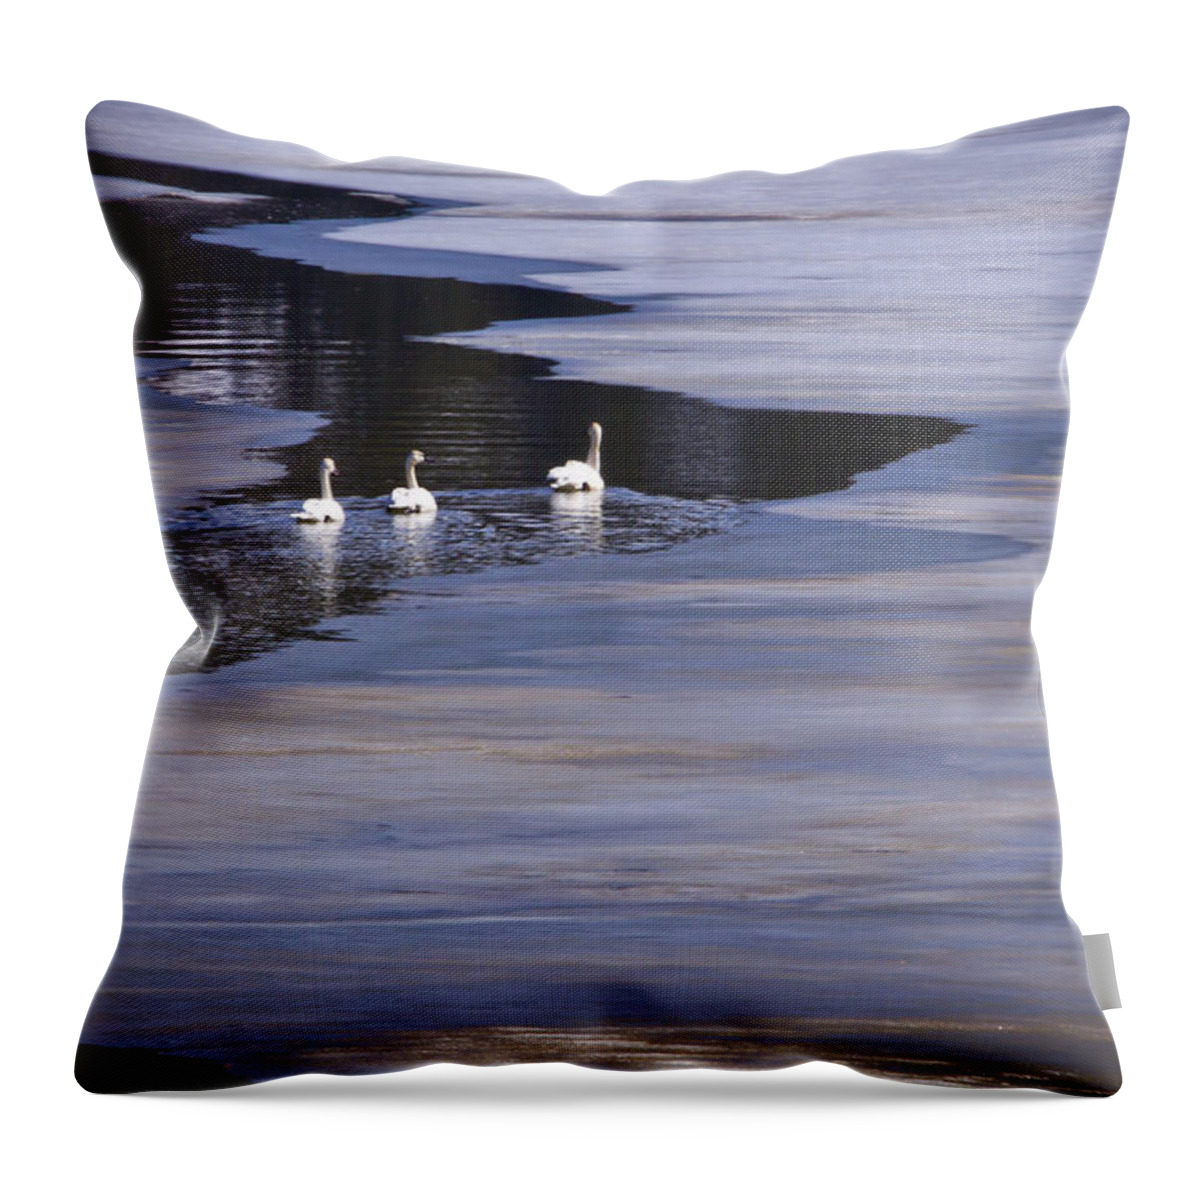 Tundra Swan Throw Pillow featuring the photograph Tourist Swans by Albert Seger